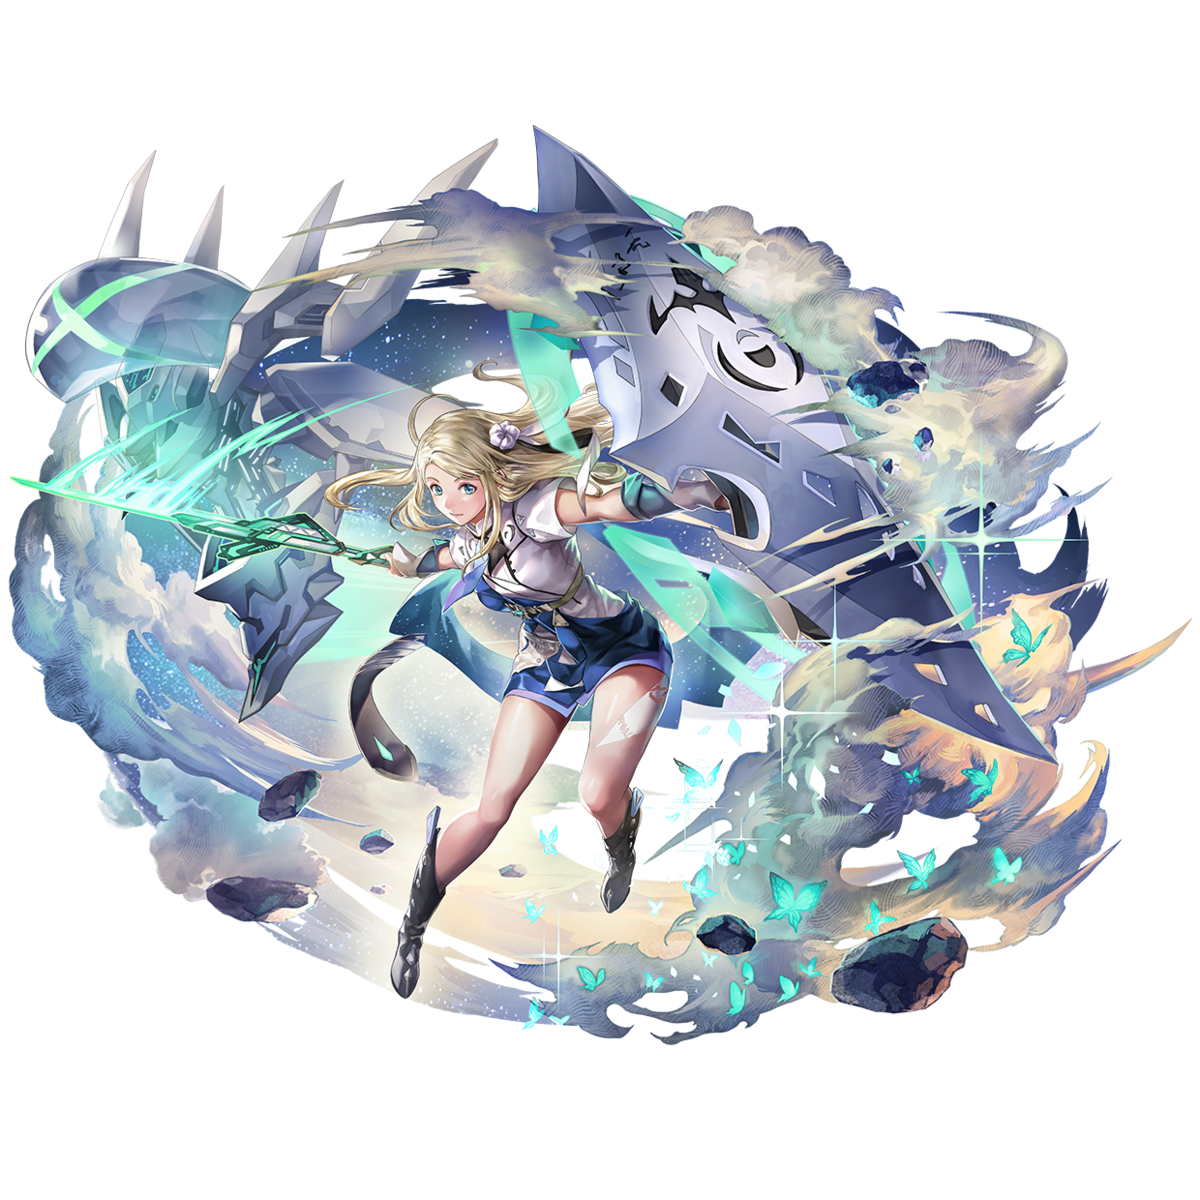 Harle/Gallery - Another Eden Wiki